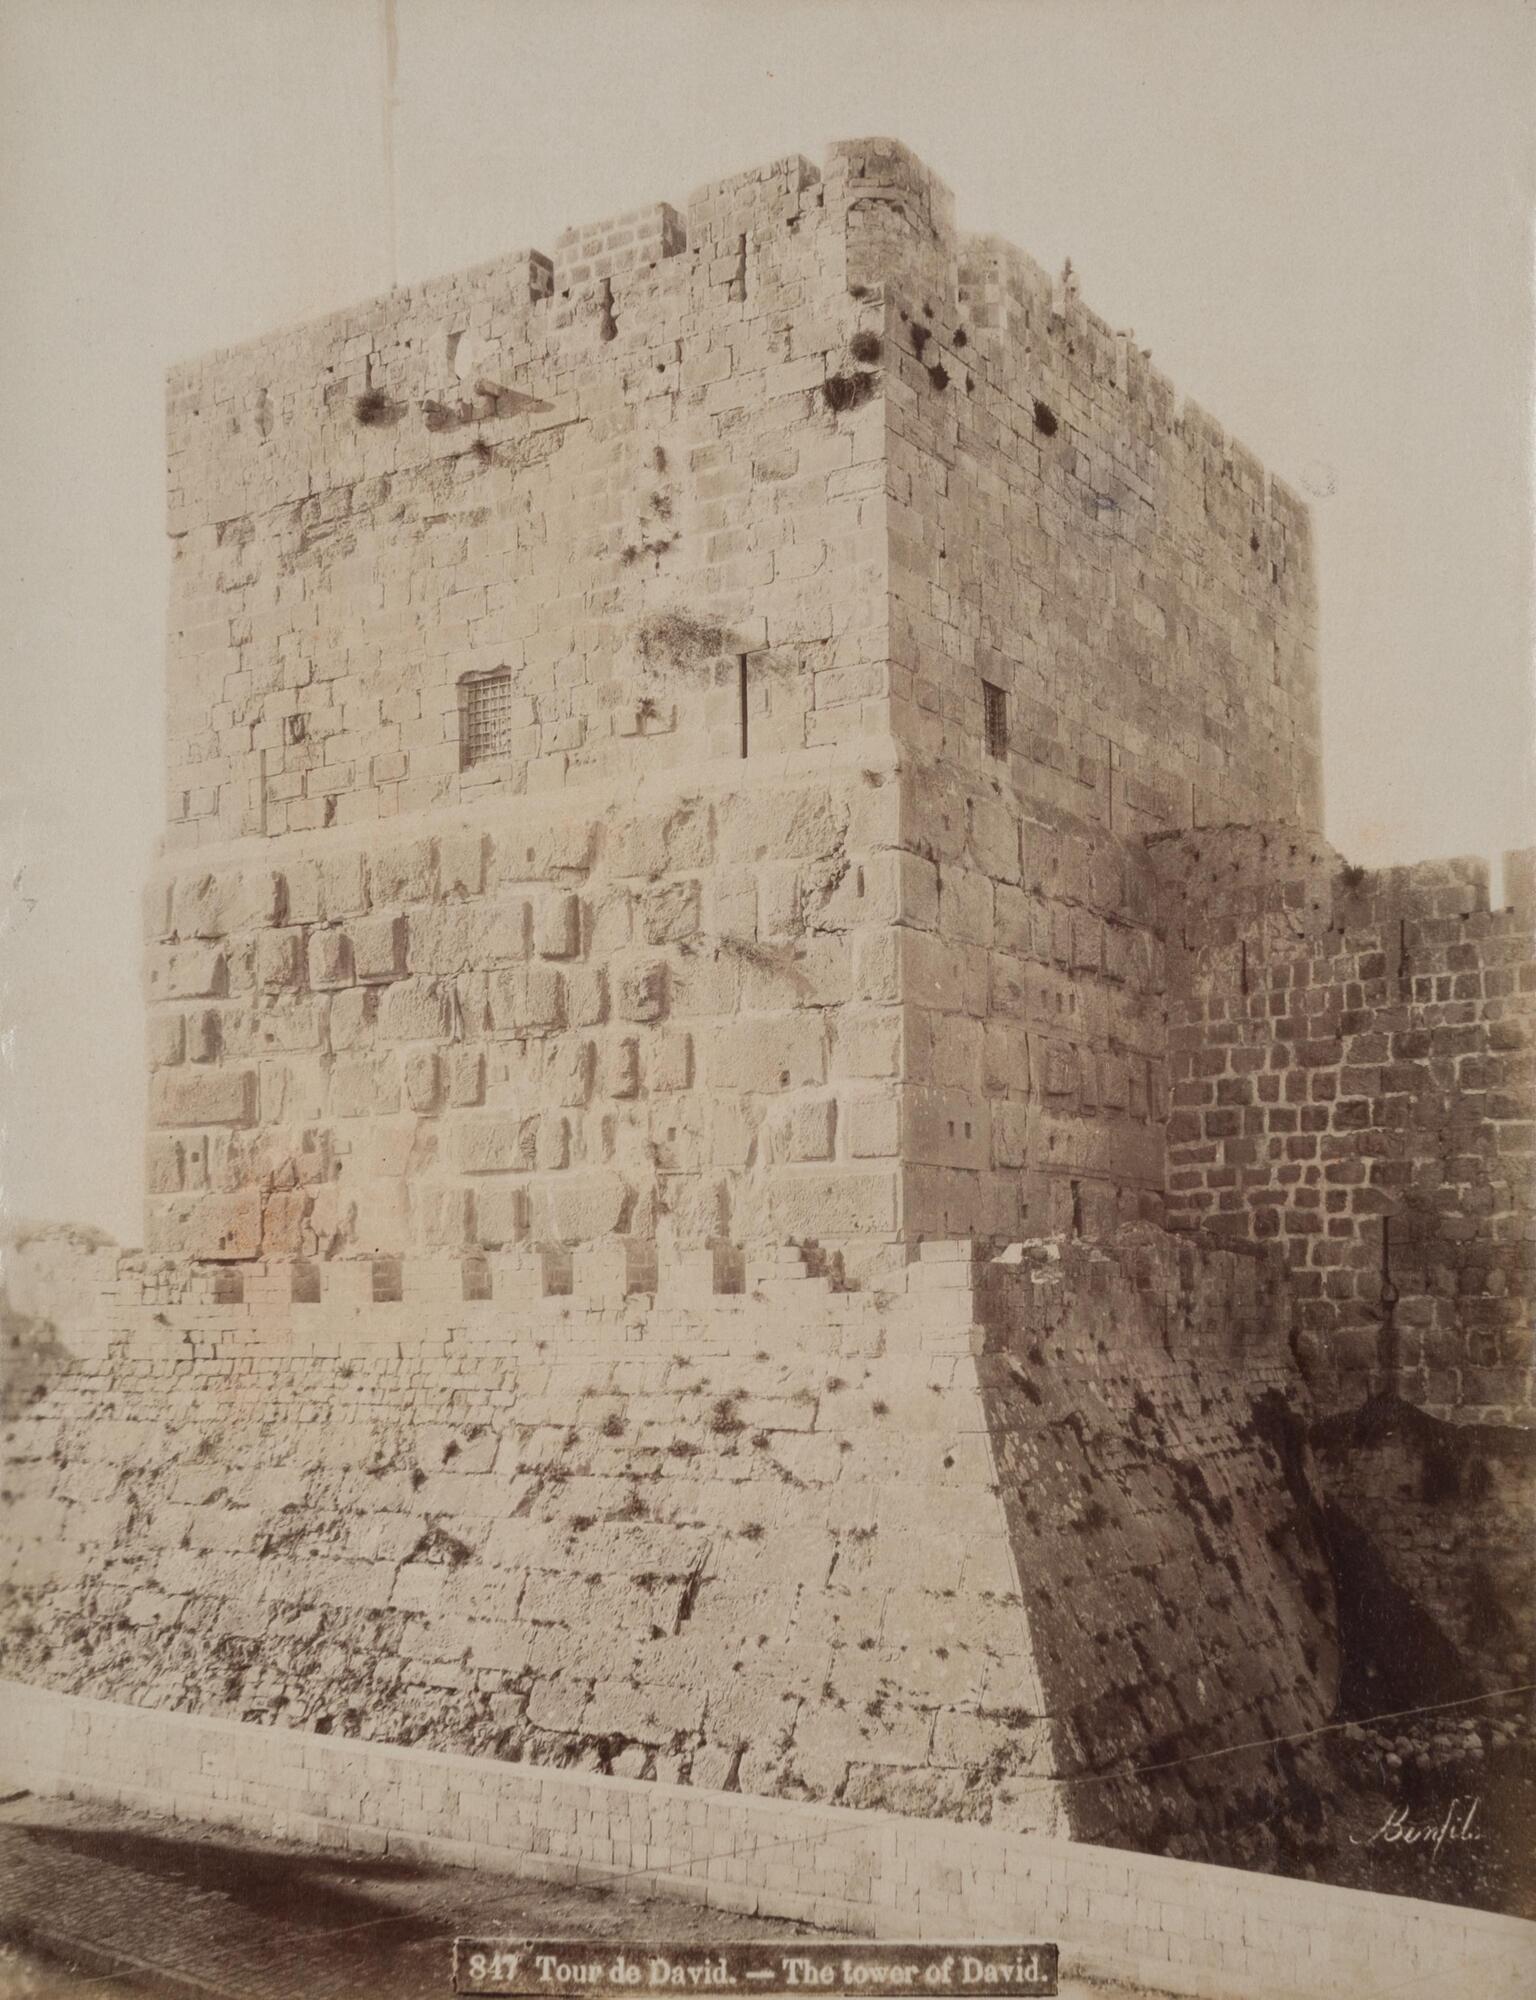 The photograph shows a rectangular stone tower from below with crenellated battlements, small grated windows, and a sloping base.